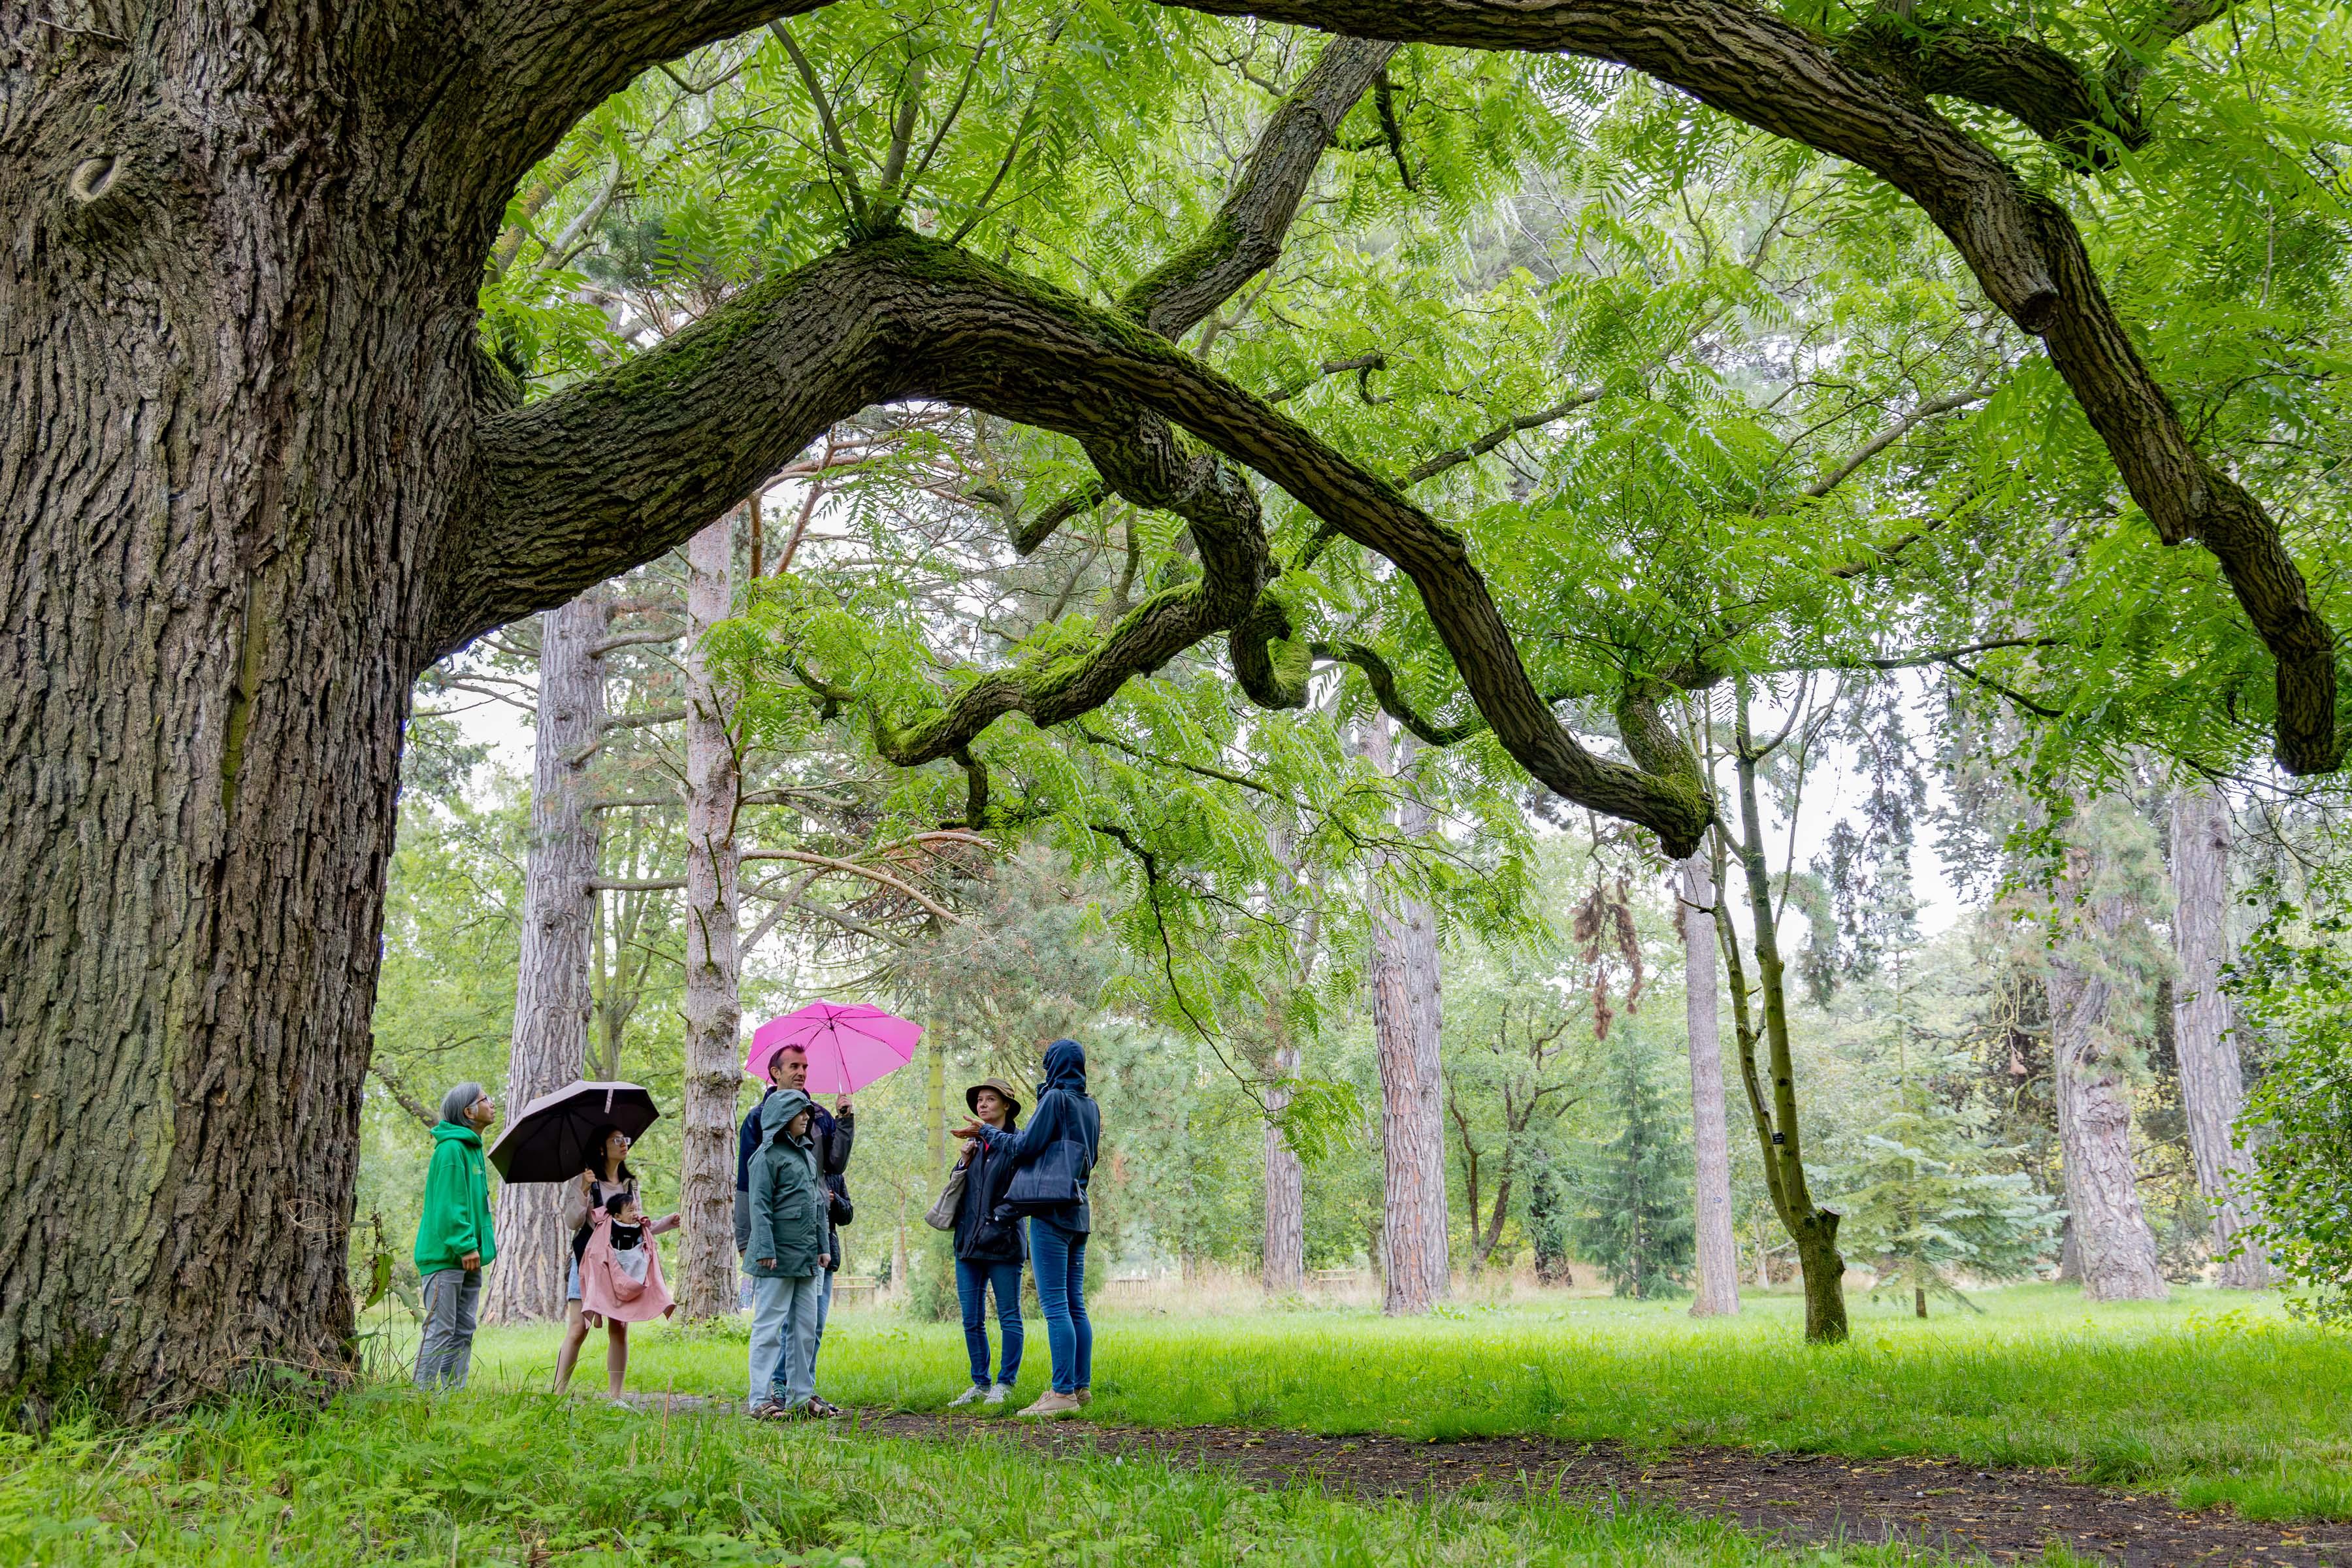 People stand under the canopy of a giant tree in the Garden